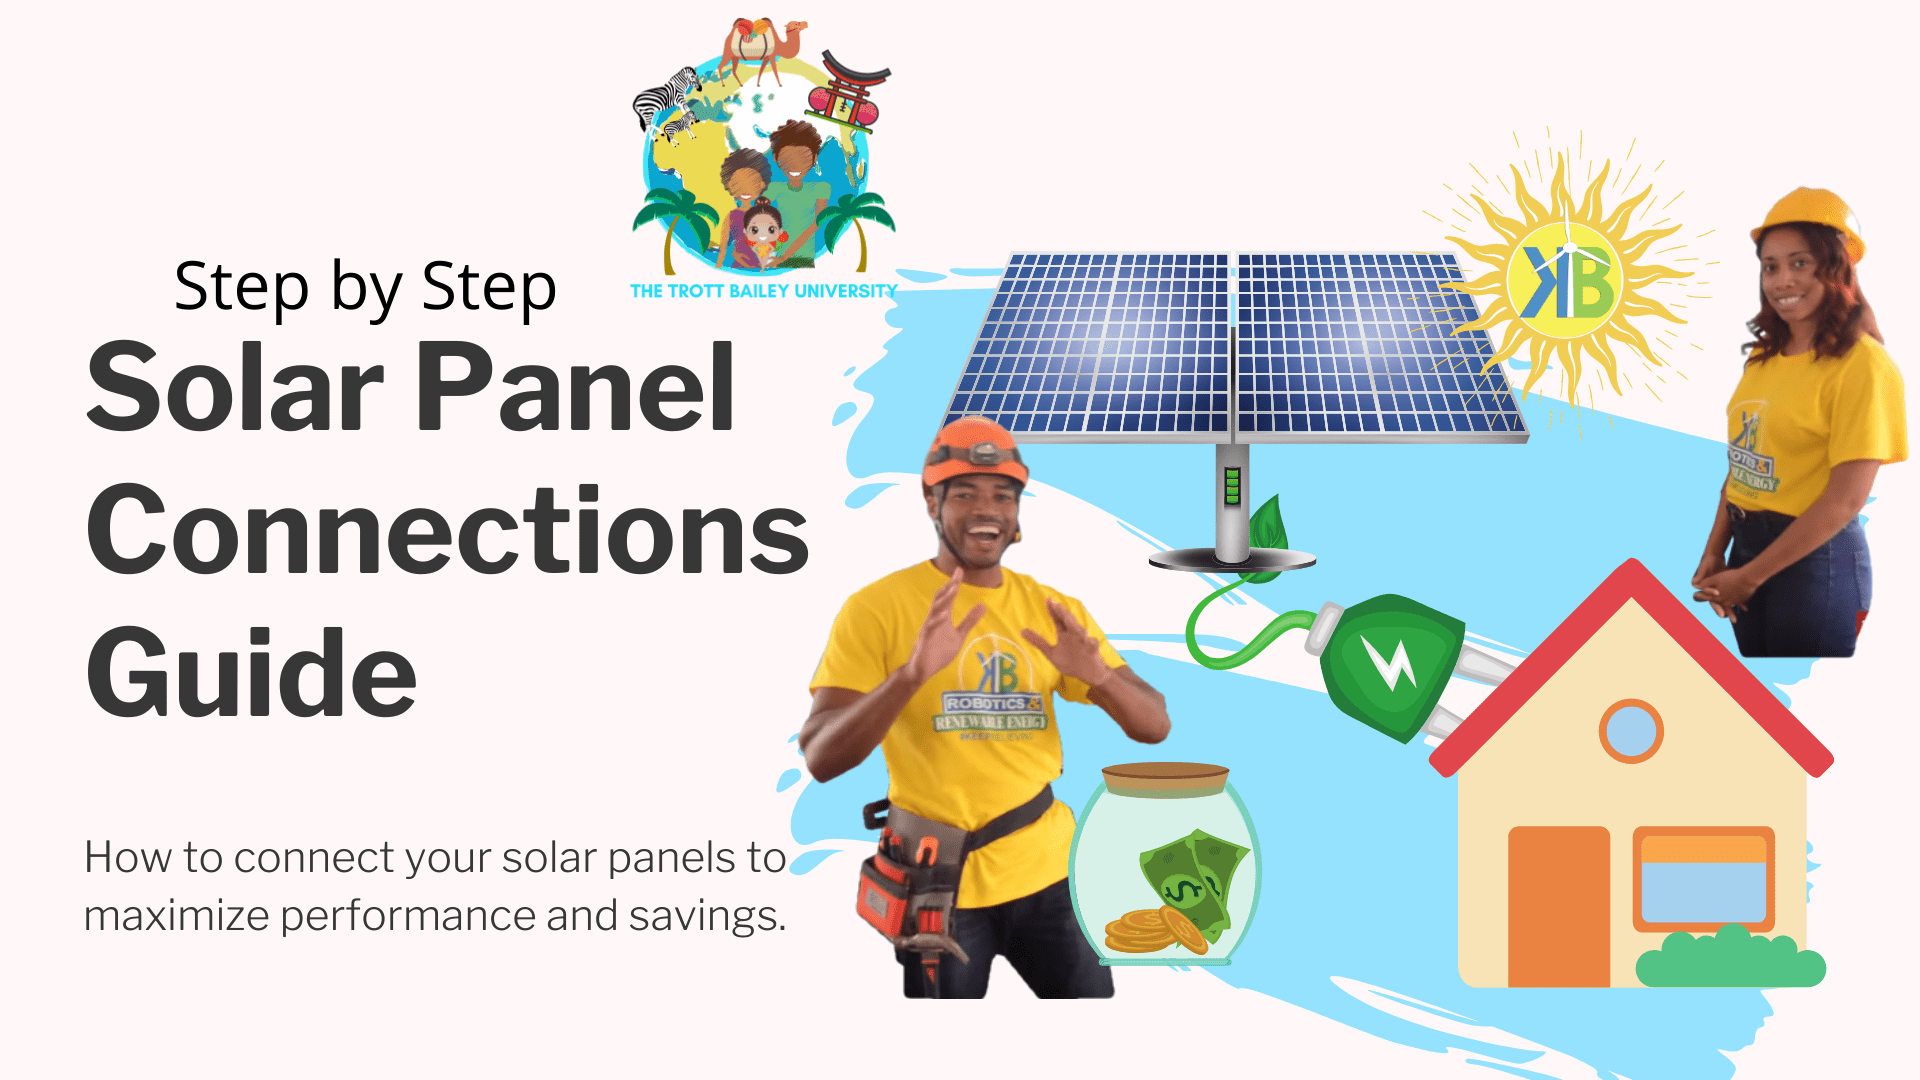 Introduction step by step solar panel connection guide series or parallel connection by the Trott Bailey University